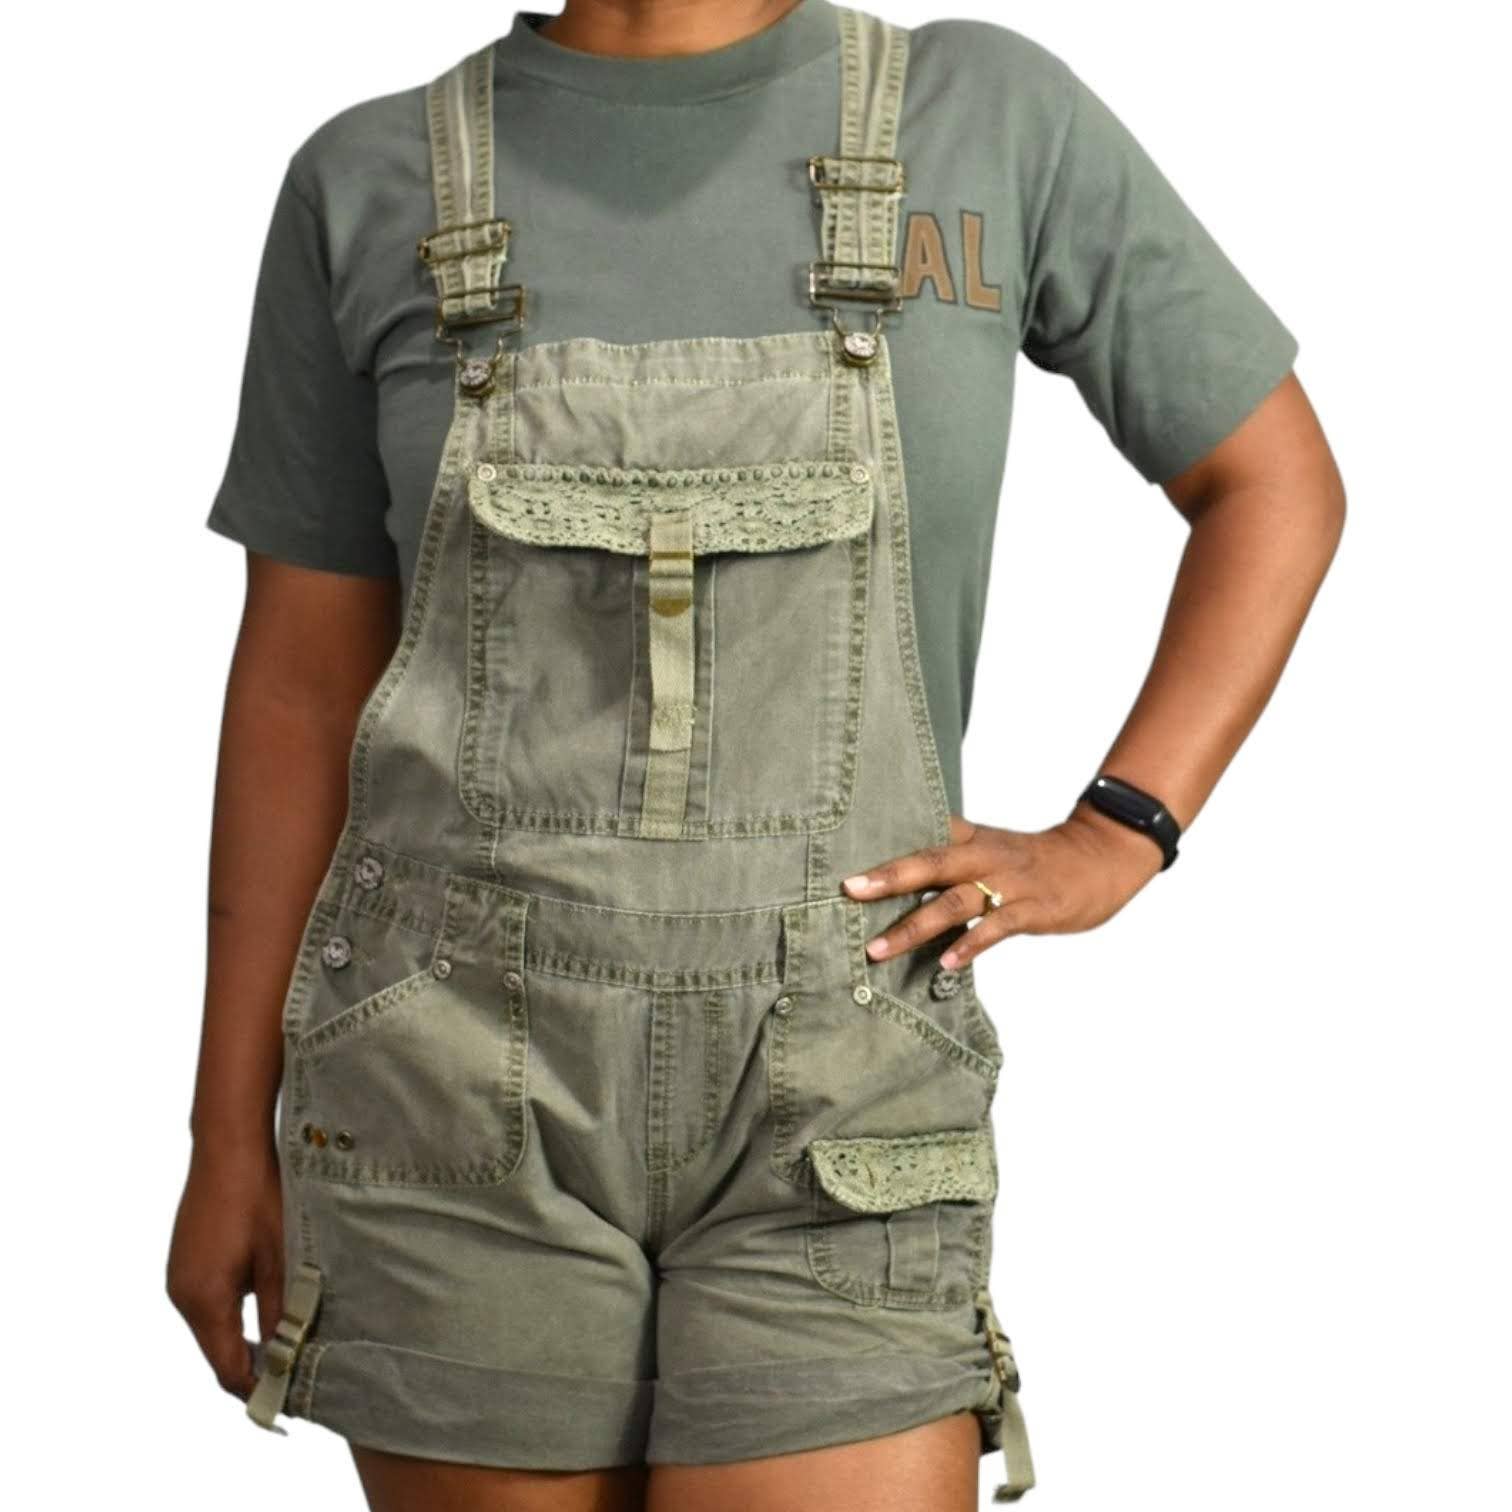 Vintage Squeeze Shortalls Bib Overalls Green Cuffed Cargo Low Rise Y2K Shorts Size Small